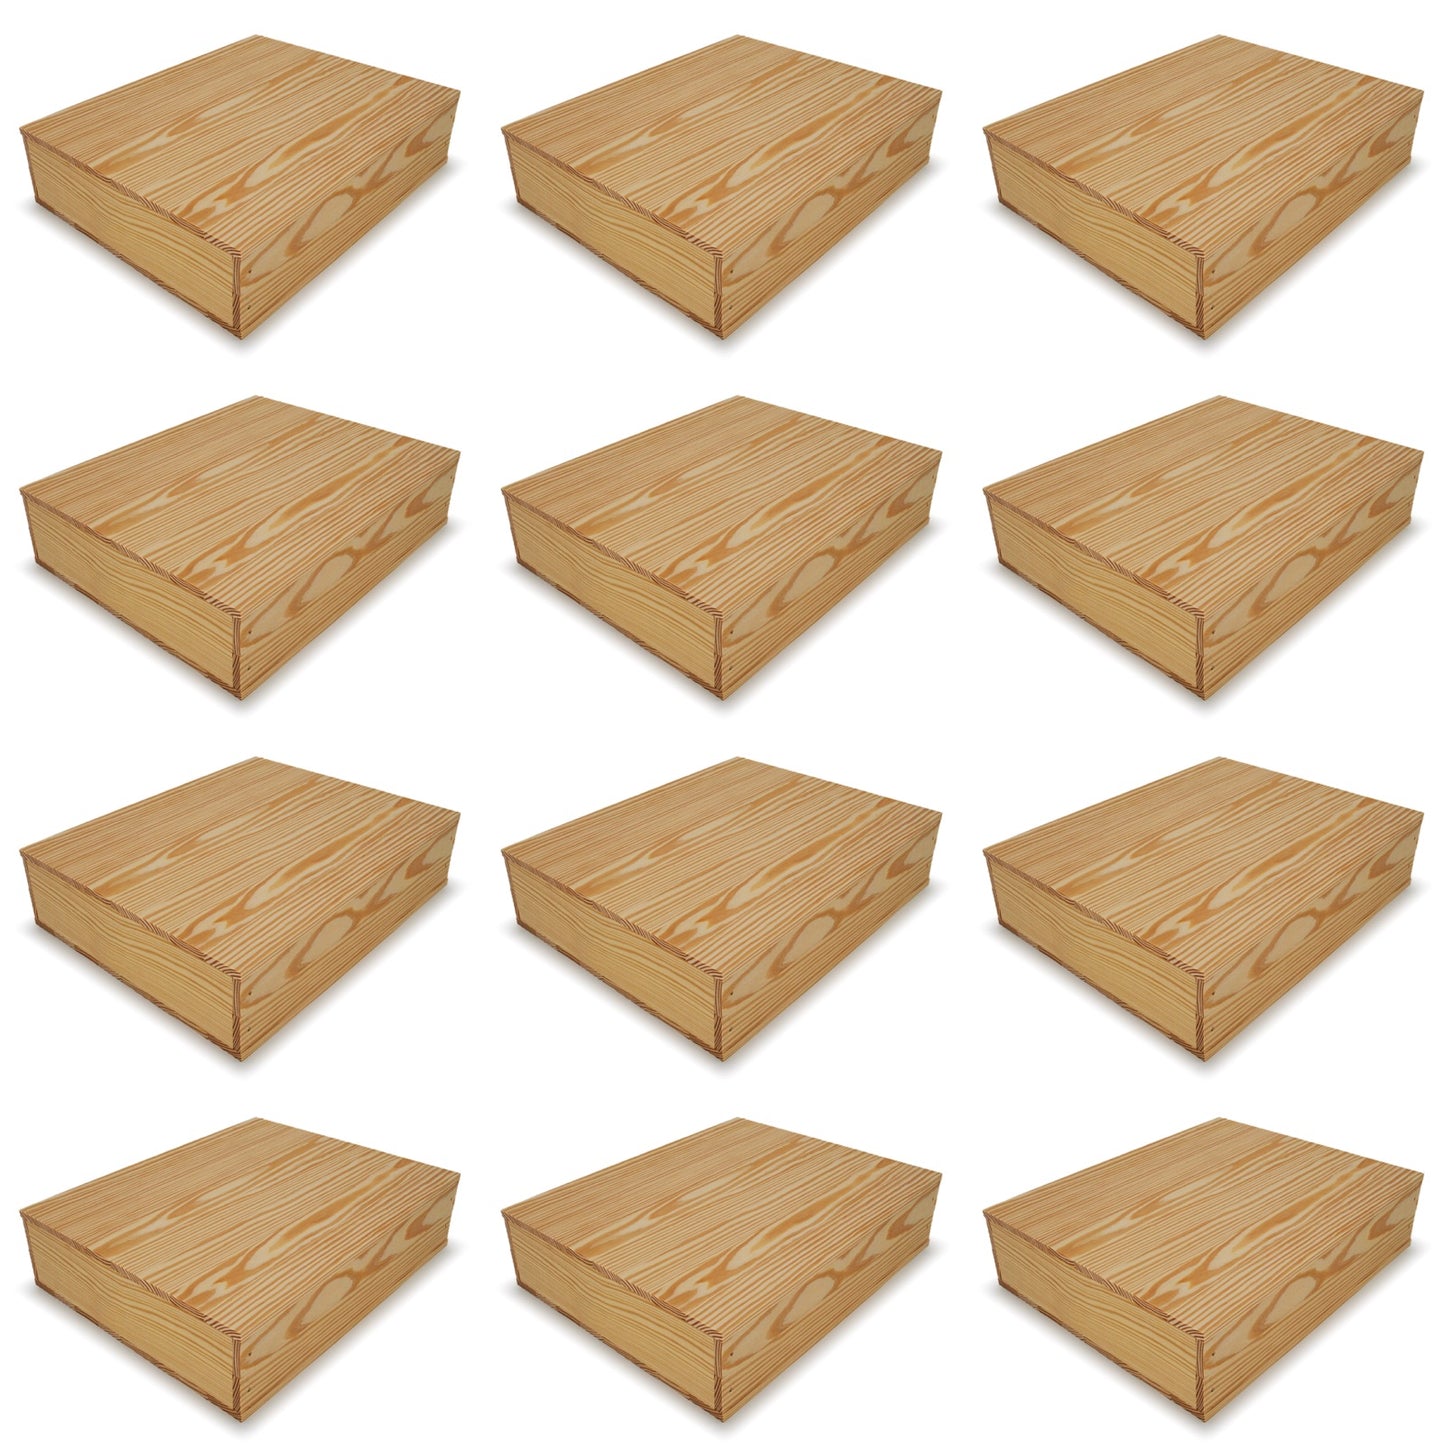 12 Small wooden crates with lid 16x13.25x3.5